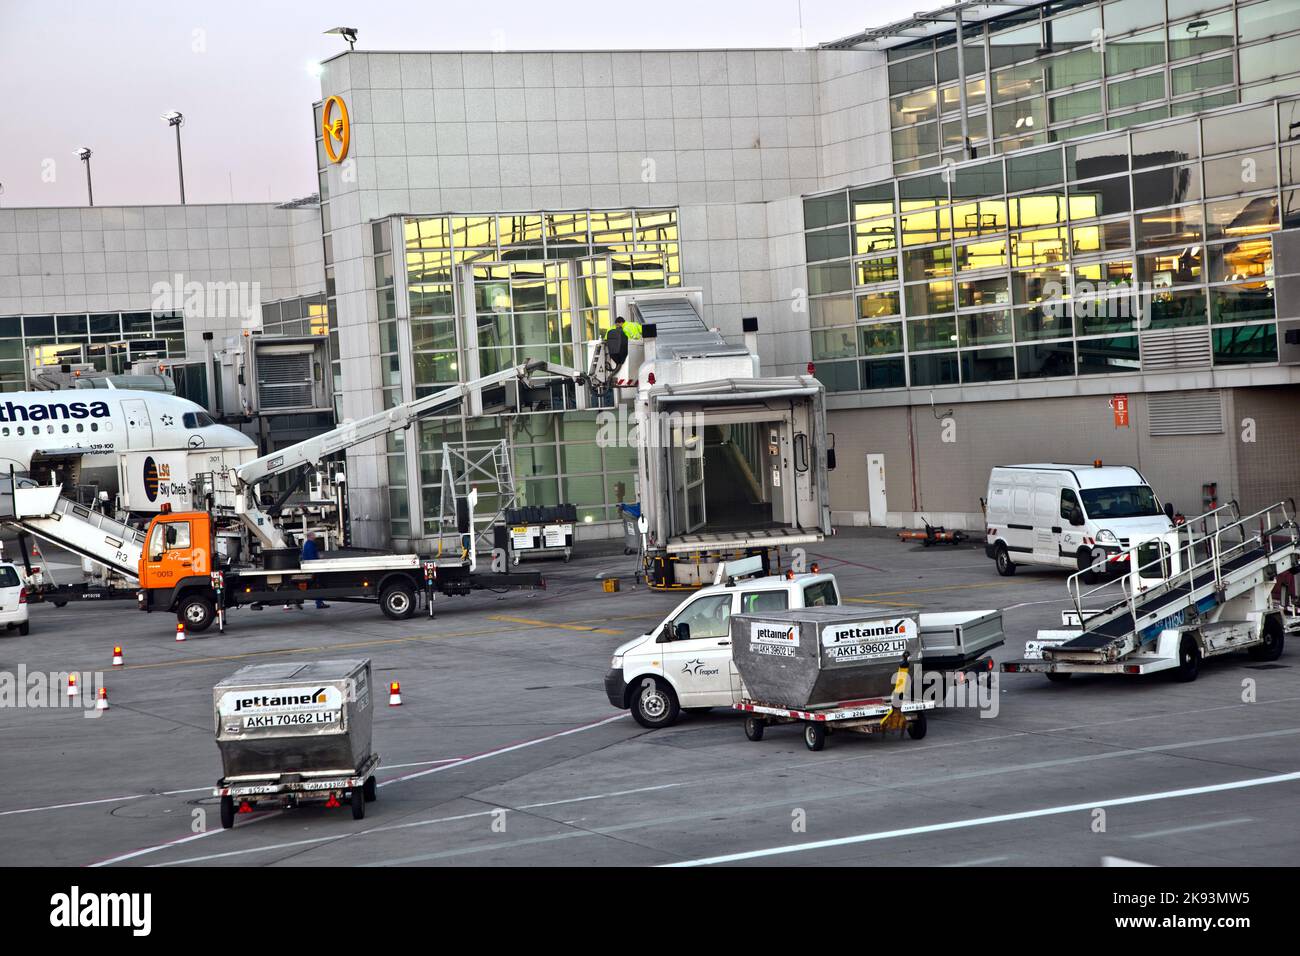 Hamburg, Germany - October 26, 2011: Arriving with Lufthansa in A-Finger  Terminal 1 in Frankfurt, Germany. The A-Finger was inaugurated 2010 and offe Stock Photo